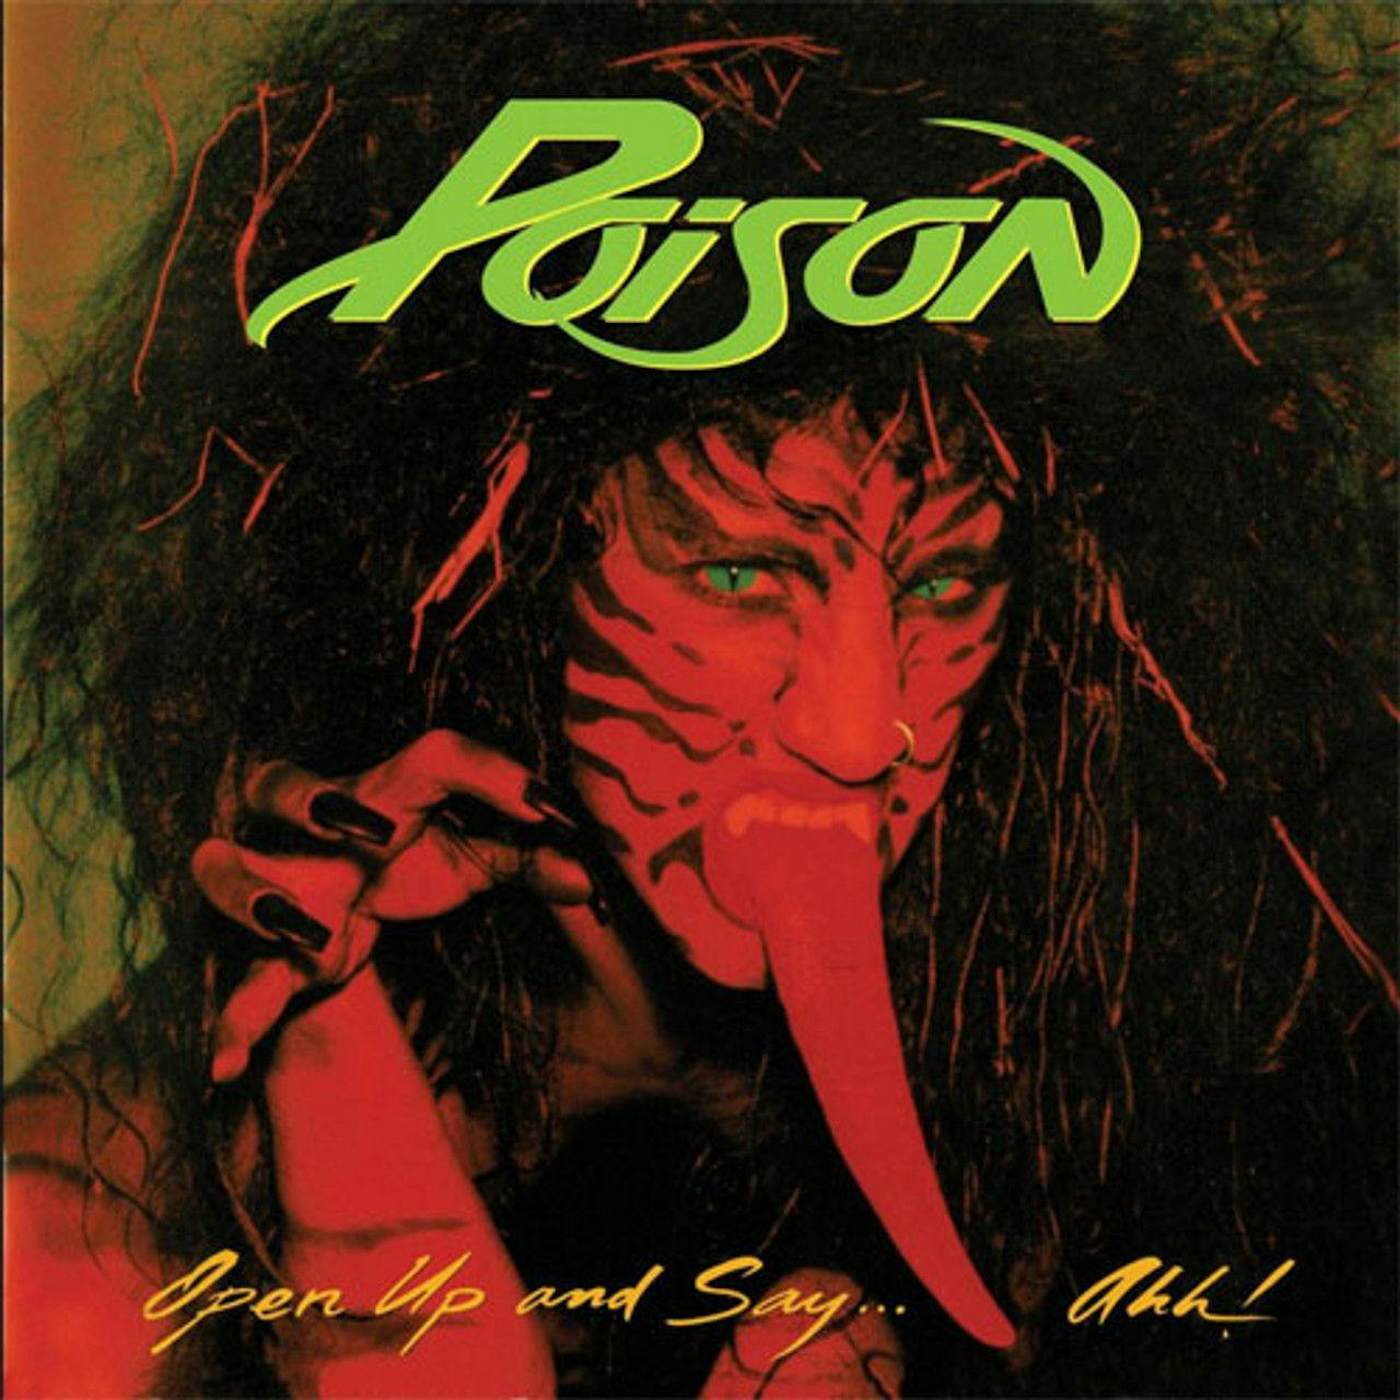 Poison Open Up And Say... Ahh! (LP) Vinyl Record